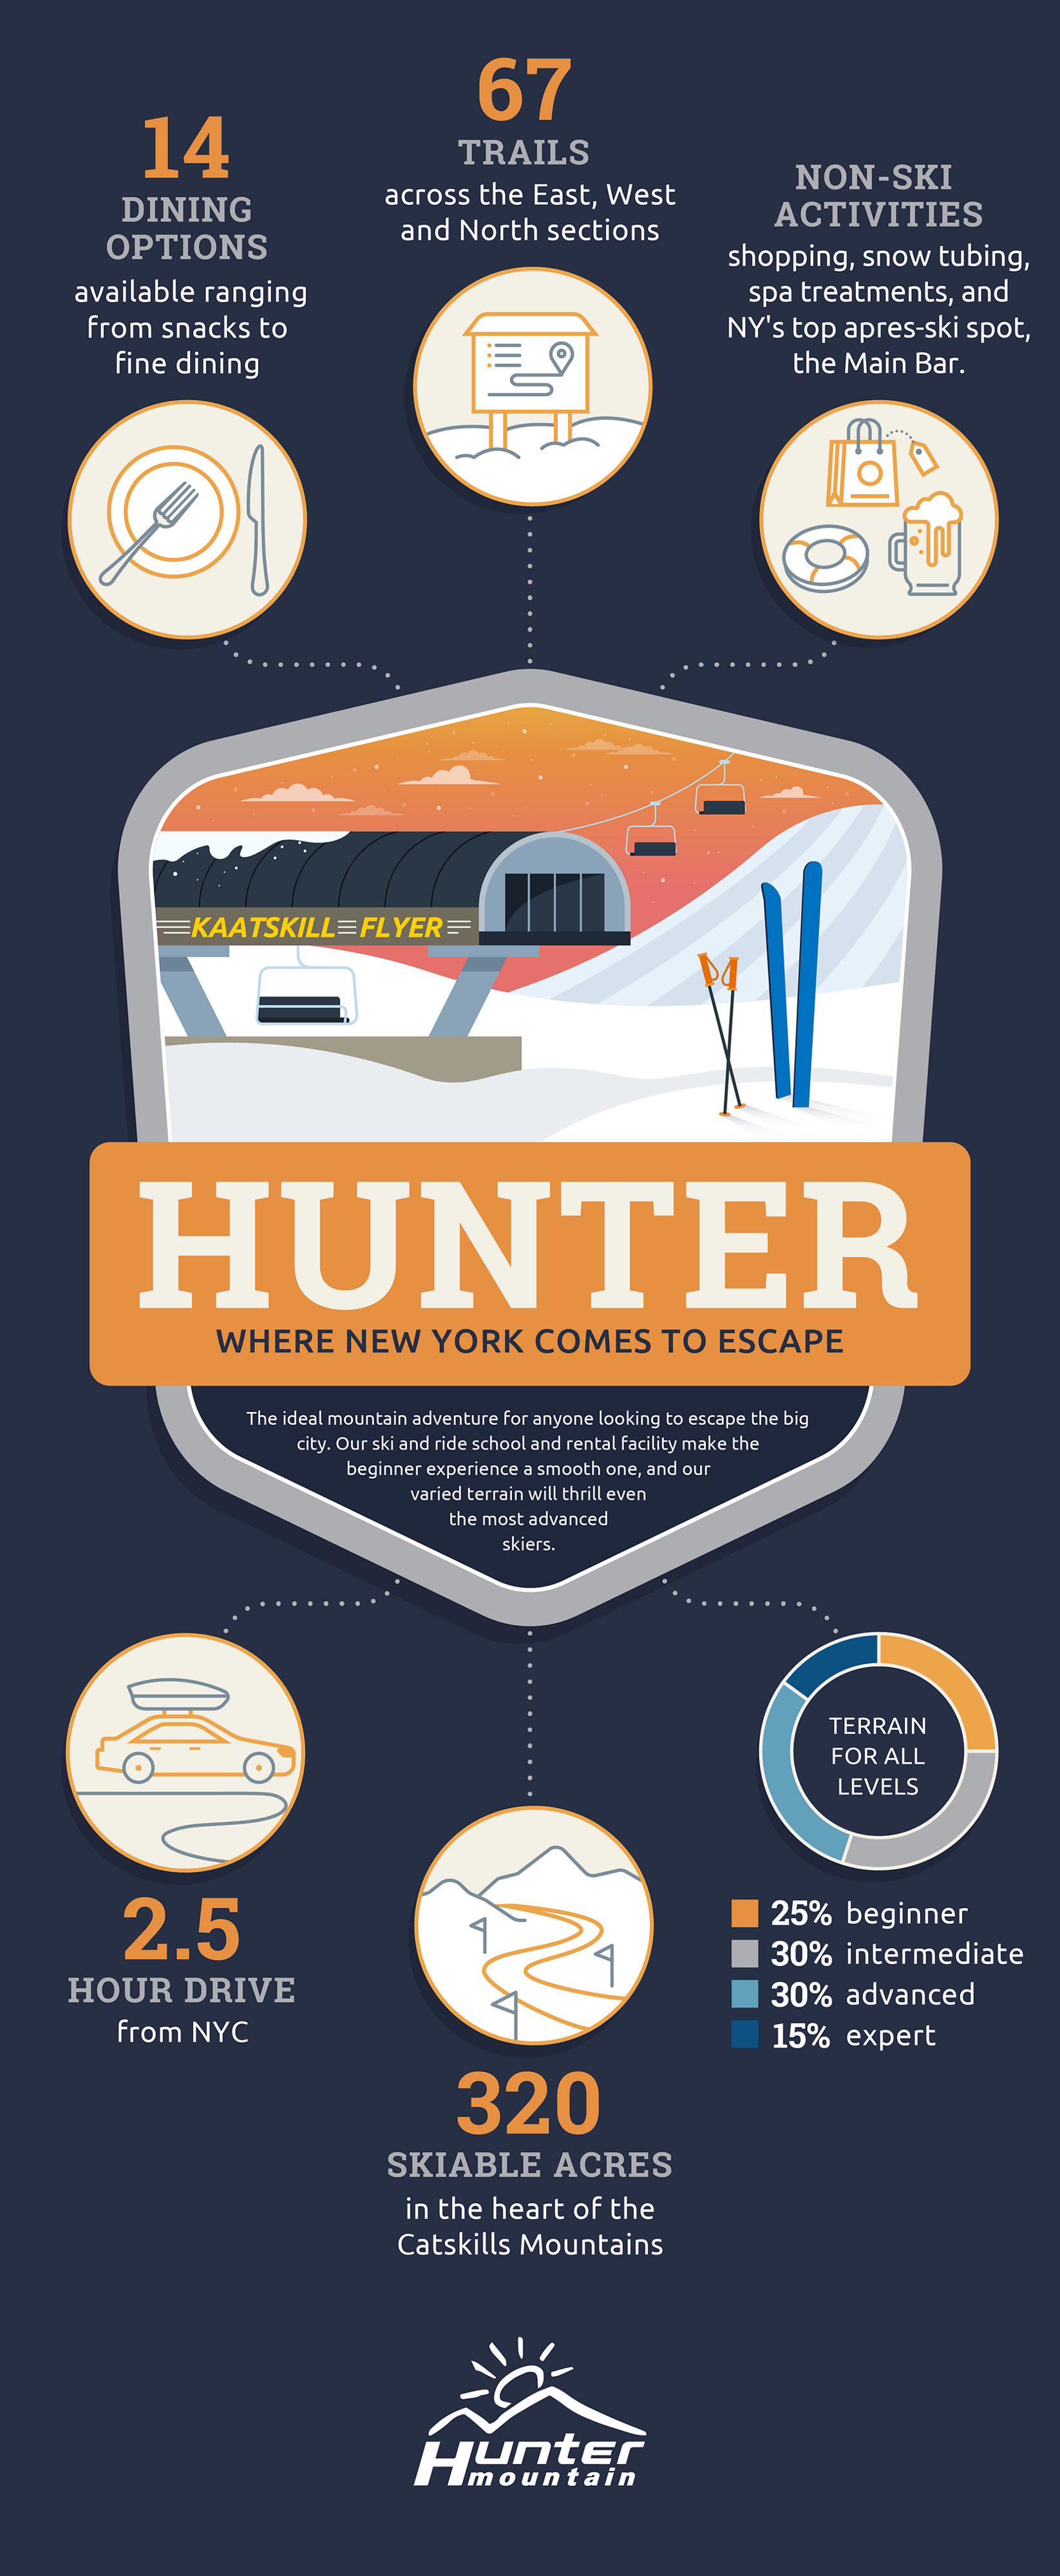 An infographic with key facts about Hunter Mountain, including: 14 dining options, 30 peaks, a wide range of non-ski activities, 3 hour driving distance from NYC, 320 skiable acreas, and terrain for all levels.